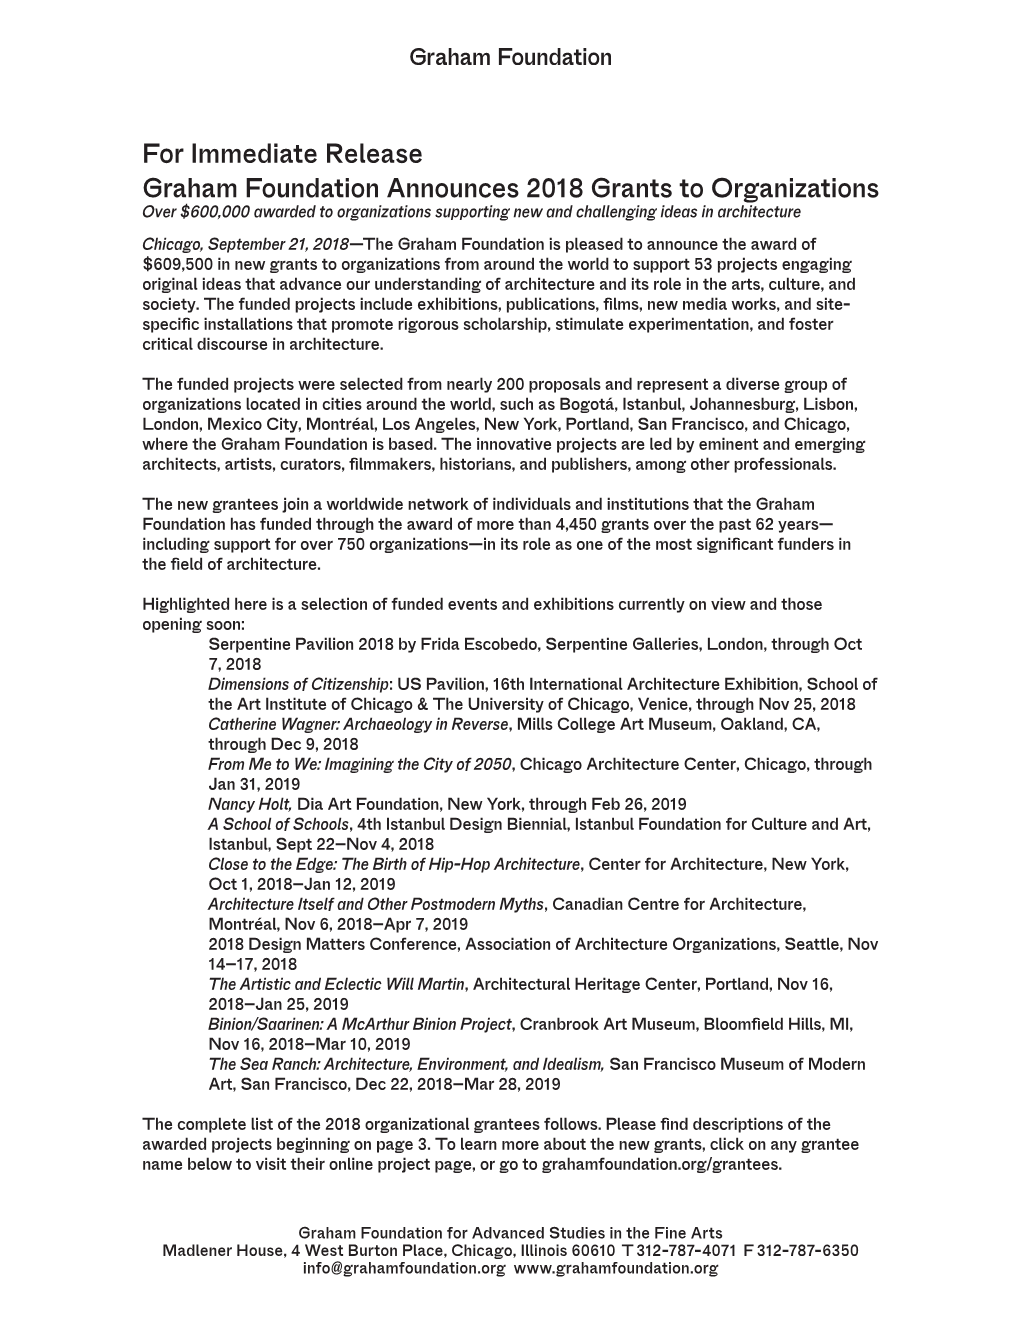 For Immediate Release Graham Foundation Announces 2018 Grants to Organizations